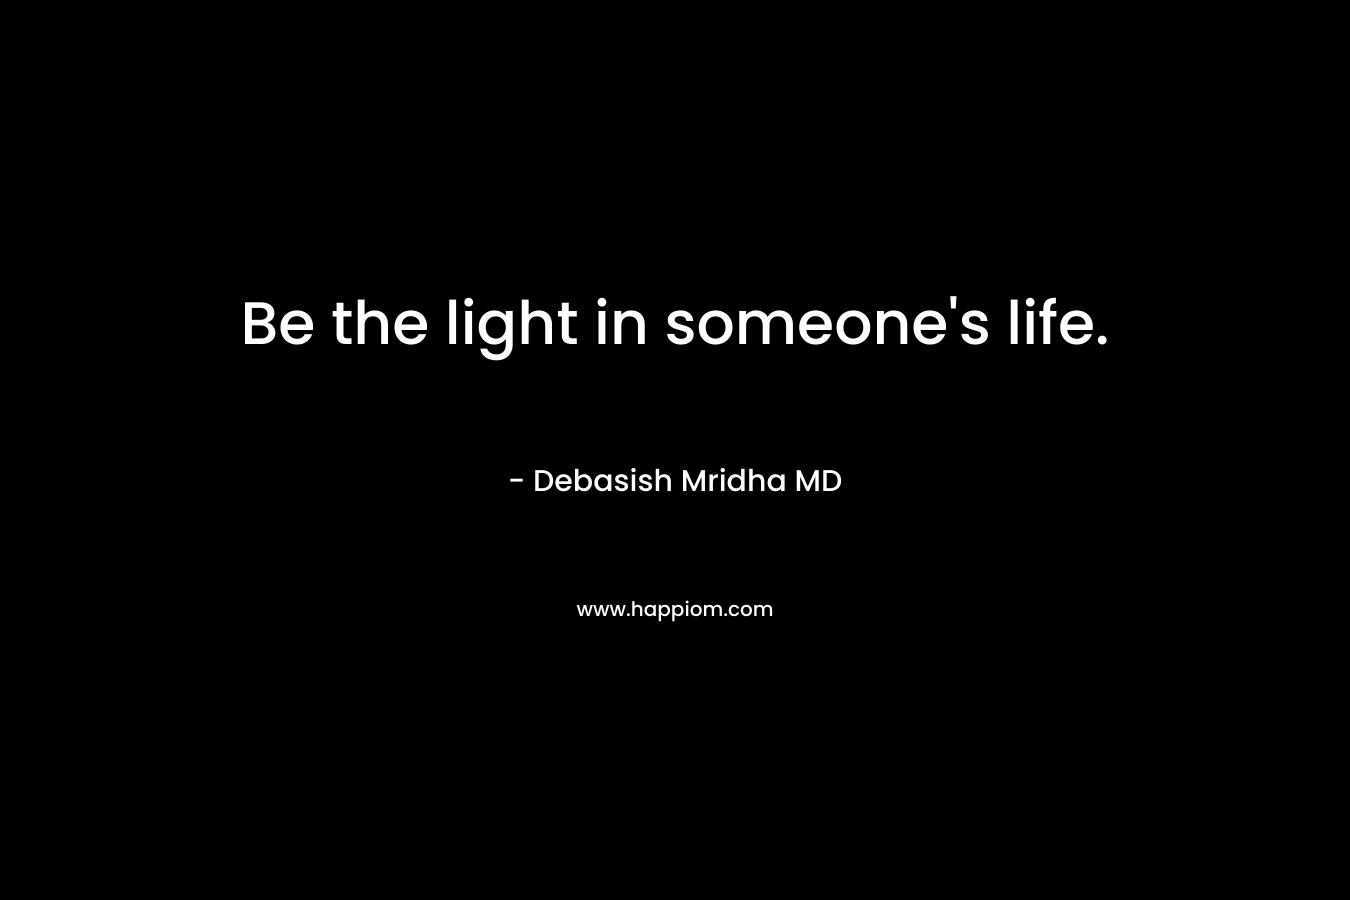 Be the light in someone's life.